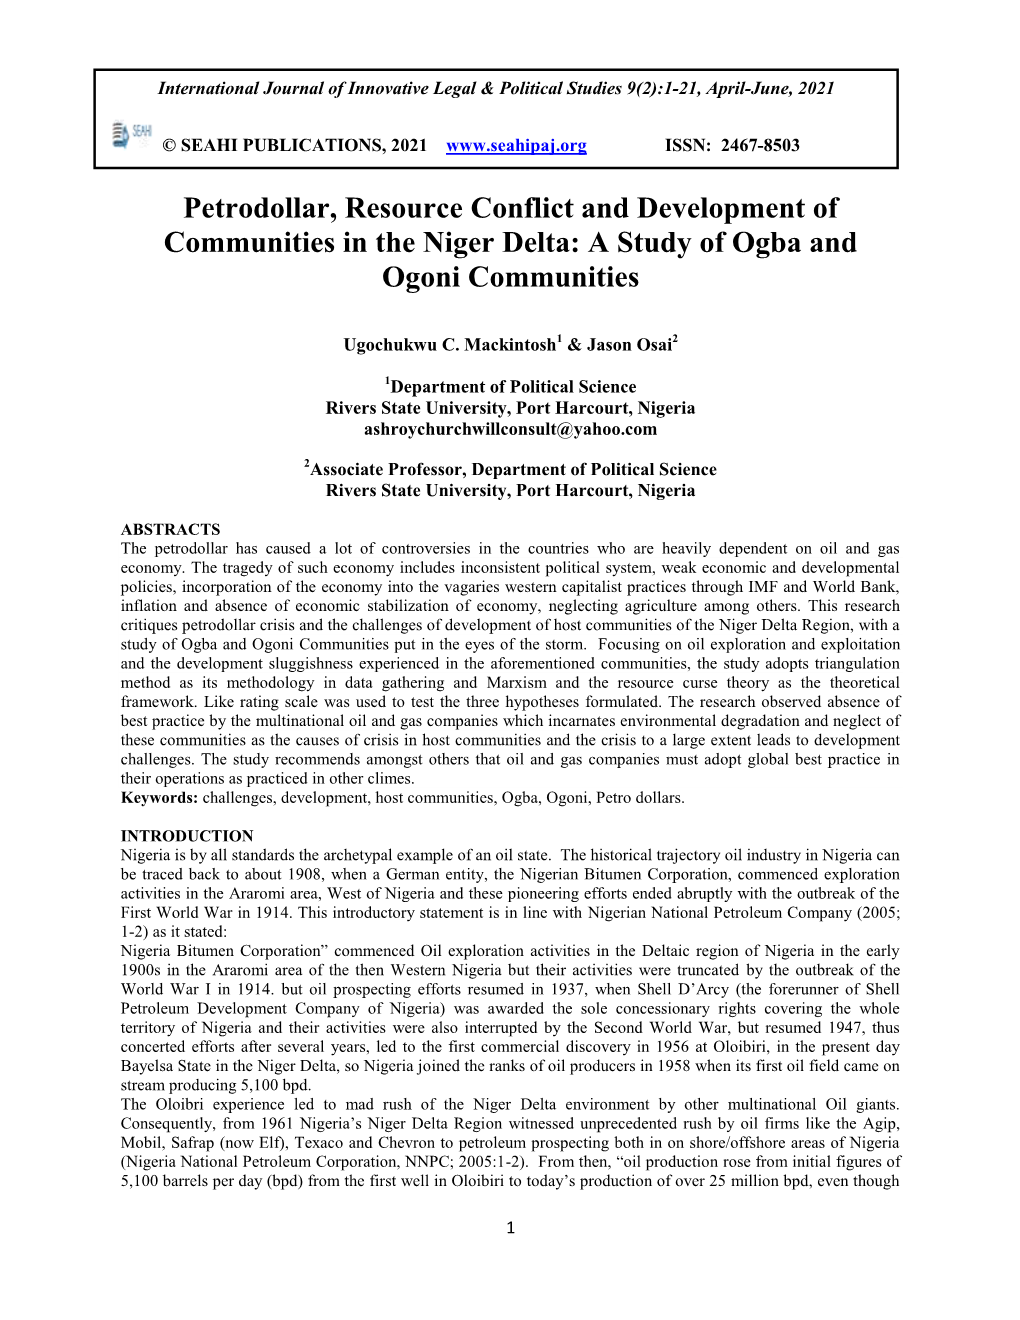 Petrodollar, Resource Conflict and Development of Communities in the Niger Delta: a Study of Ogba and Ogoni Communities